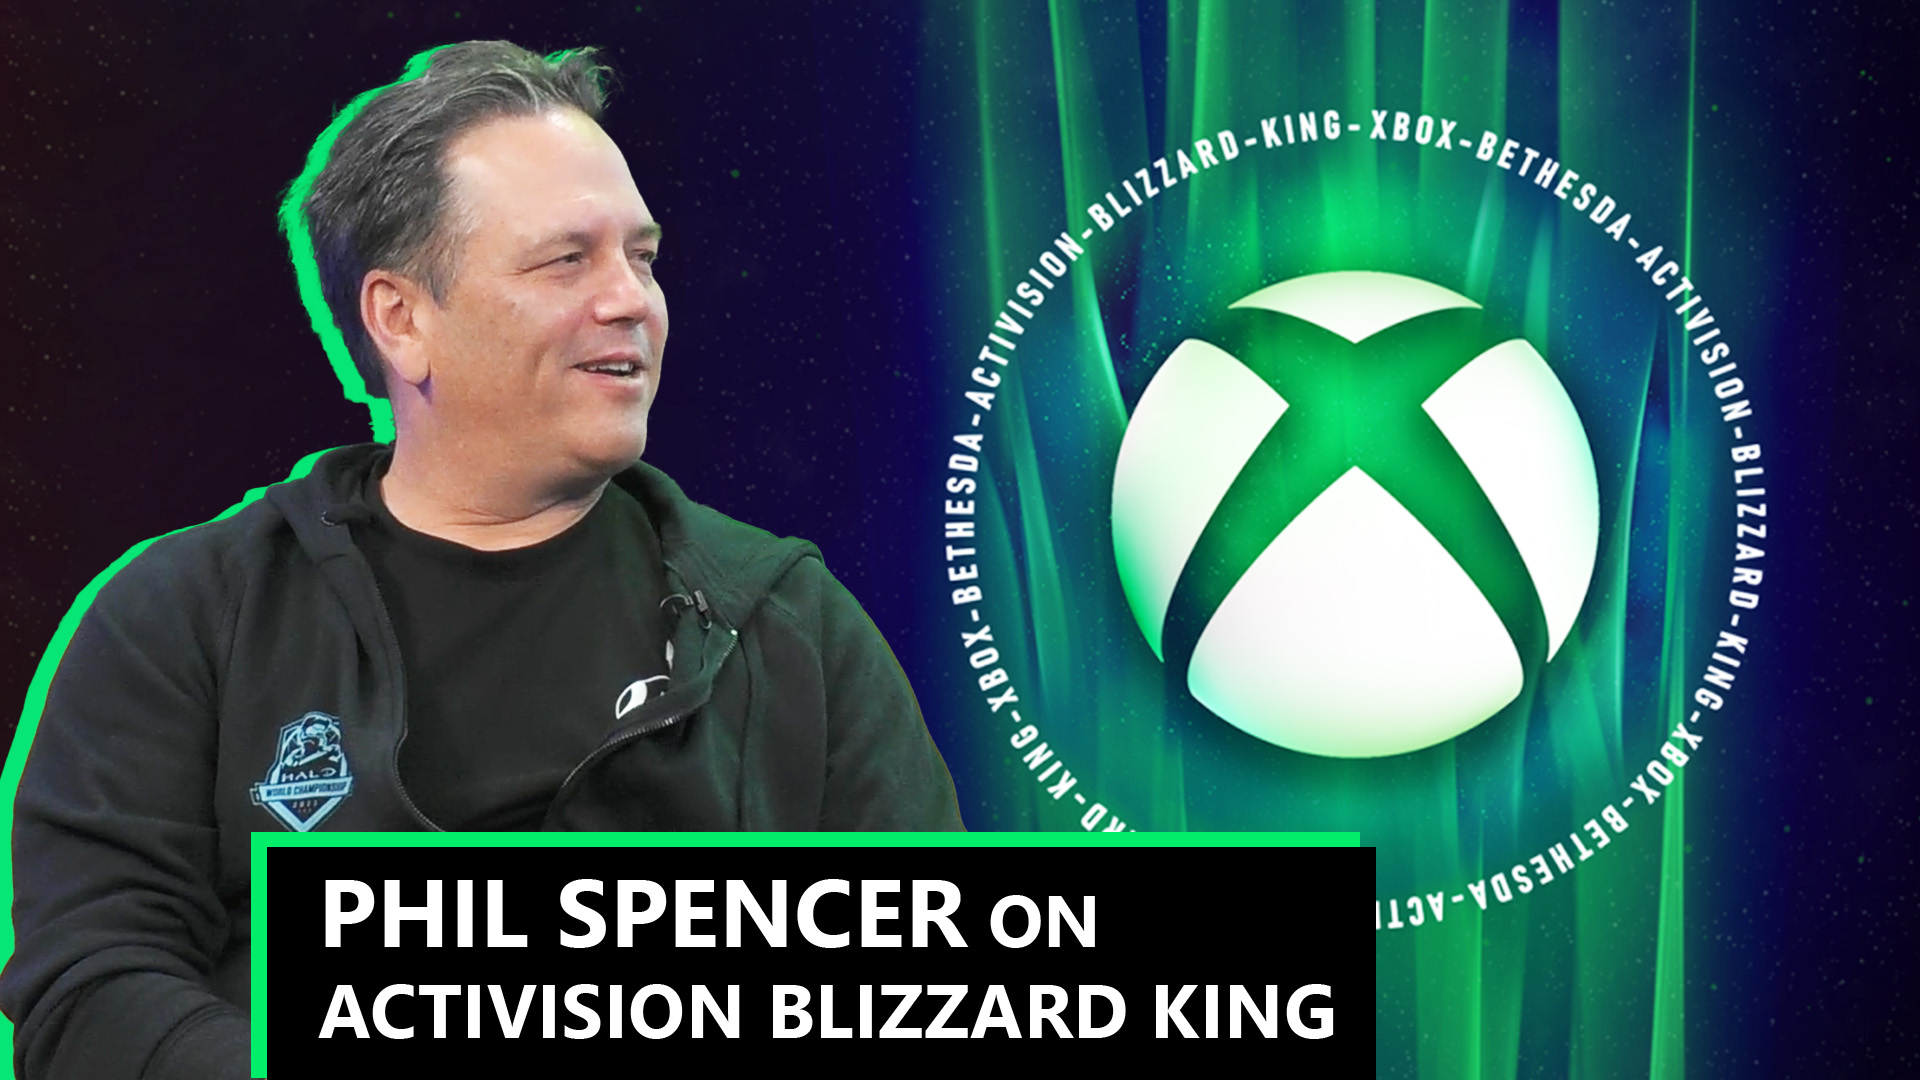 Xbox head Phil Spencer on video games as a way of life, even for the  powerful - CNET